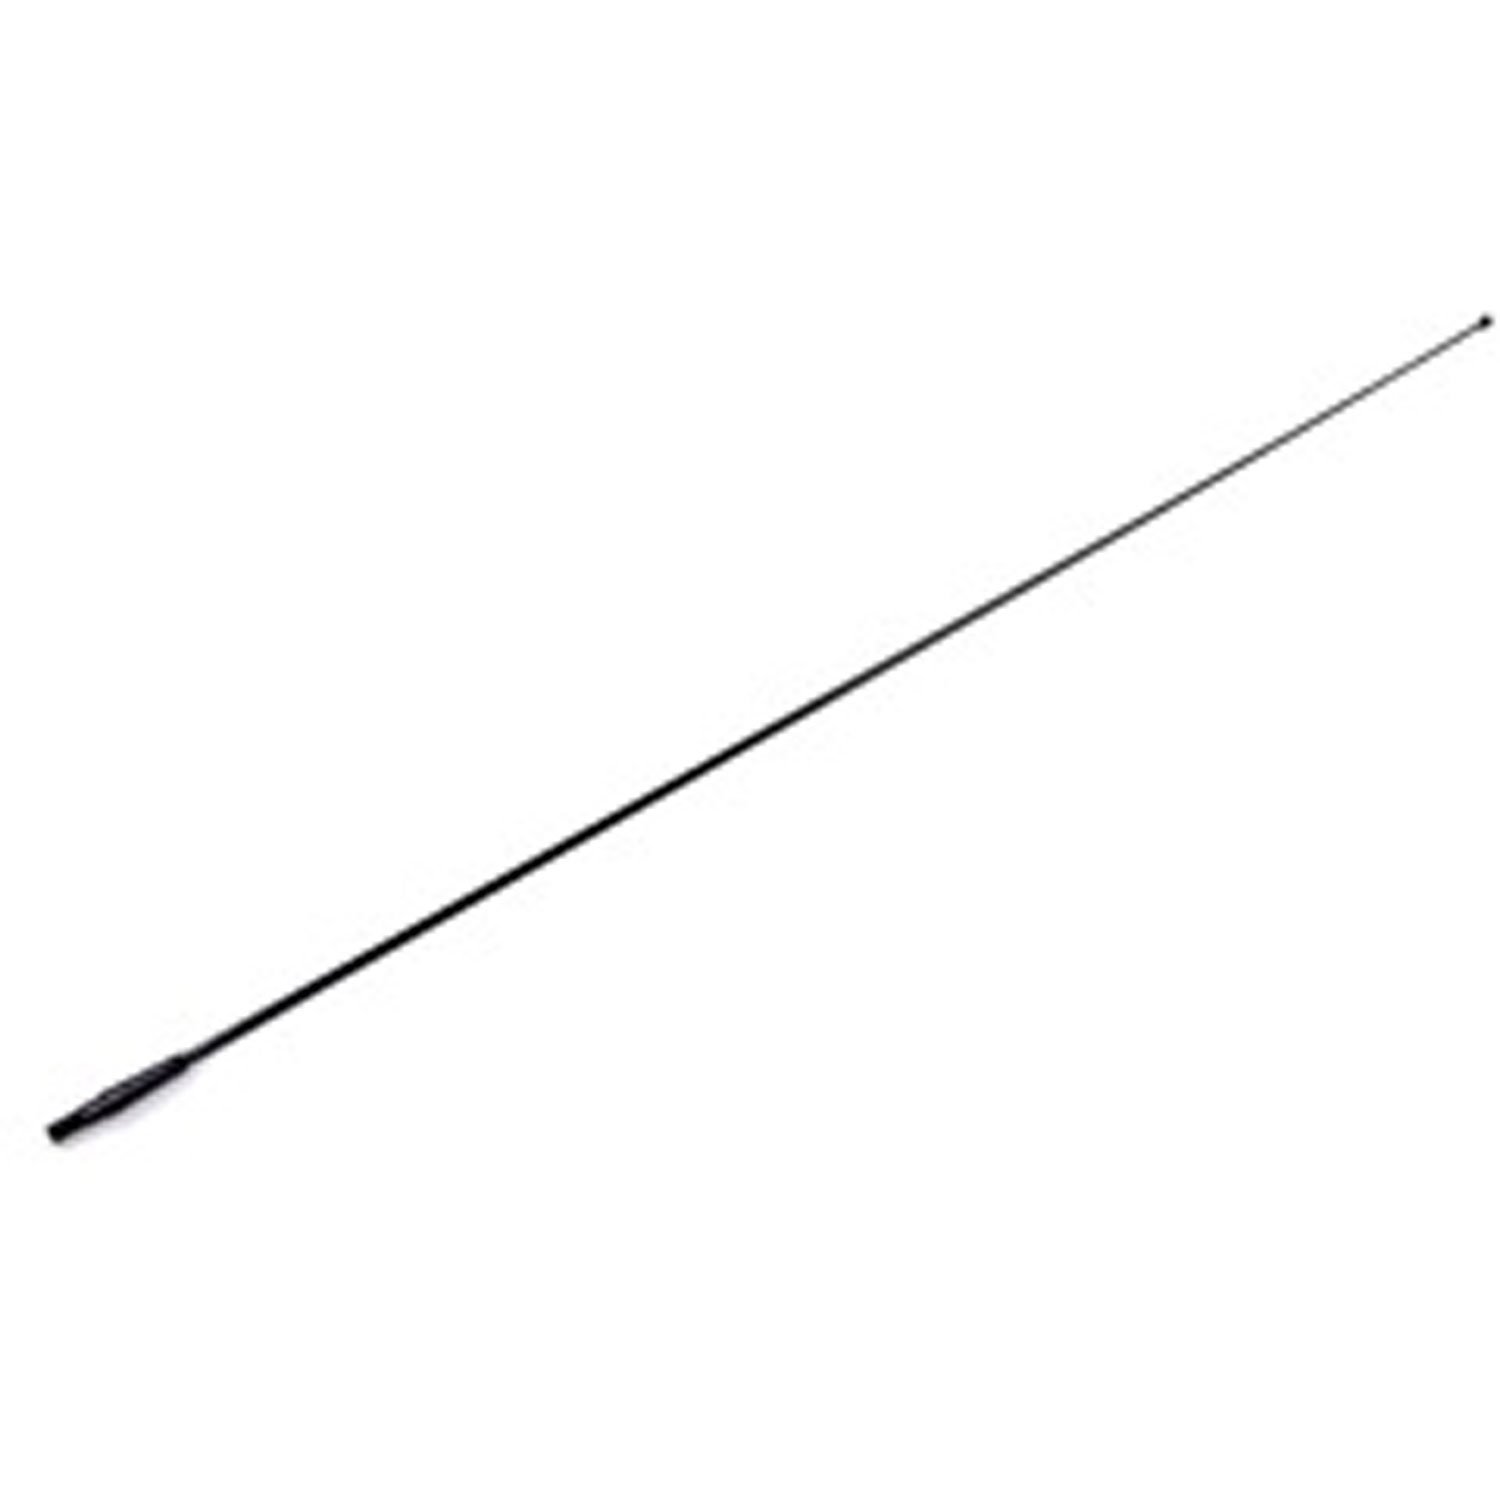 Replacement Black antenna mast from Omix-ADA, Fits 76-86 Jeep CJ and 87-95 Wrangler YJ